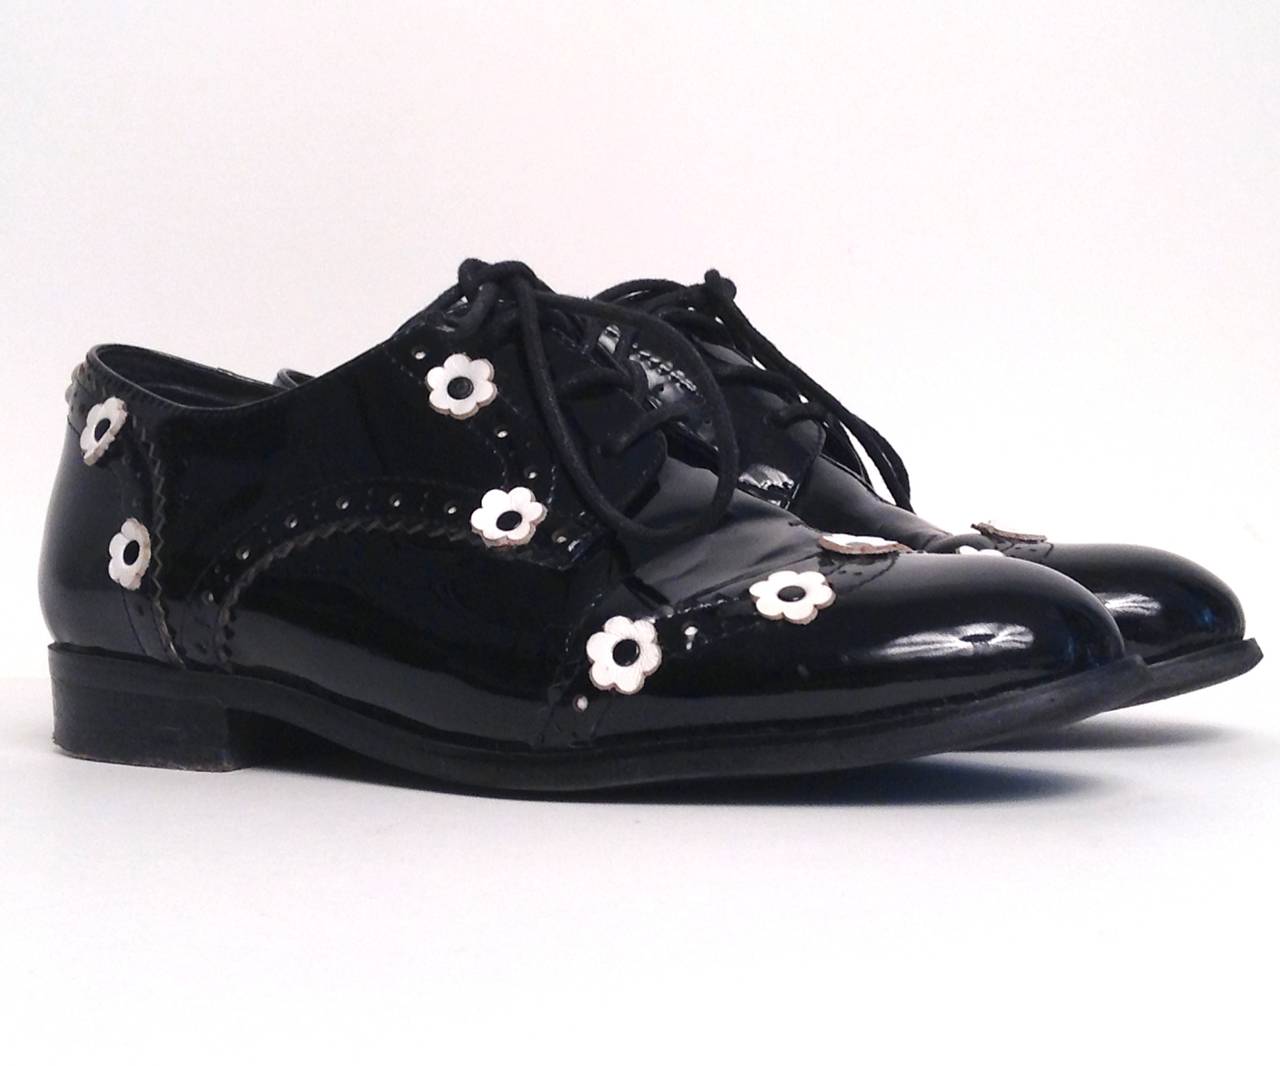 Nothing gets cuter than these Chanel Black Patent Oxfords with Daisies. The lace up Oxfords features black patent upper with white daisy throughout. Rounded toe. Stacked heel. Lace up front. 

Measurements: 1